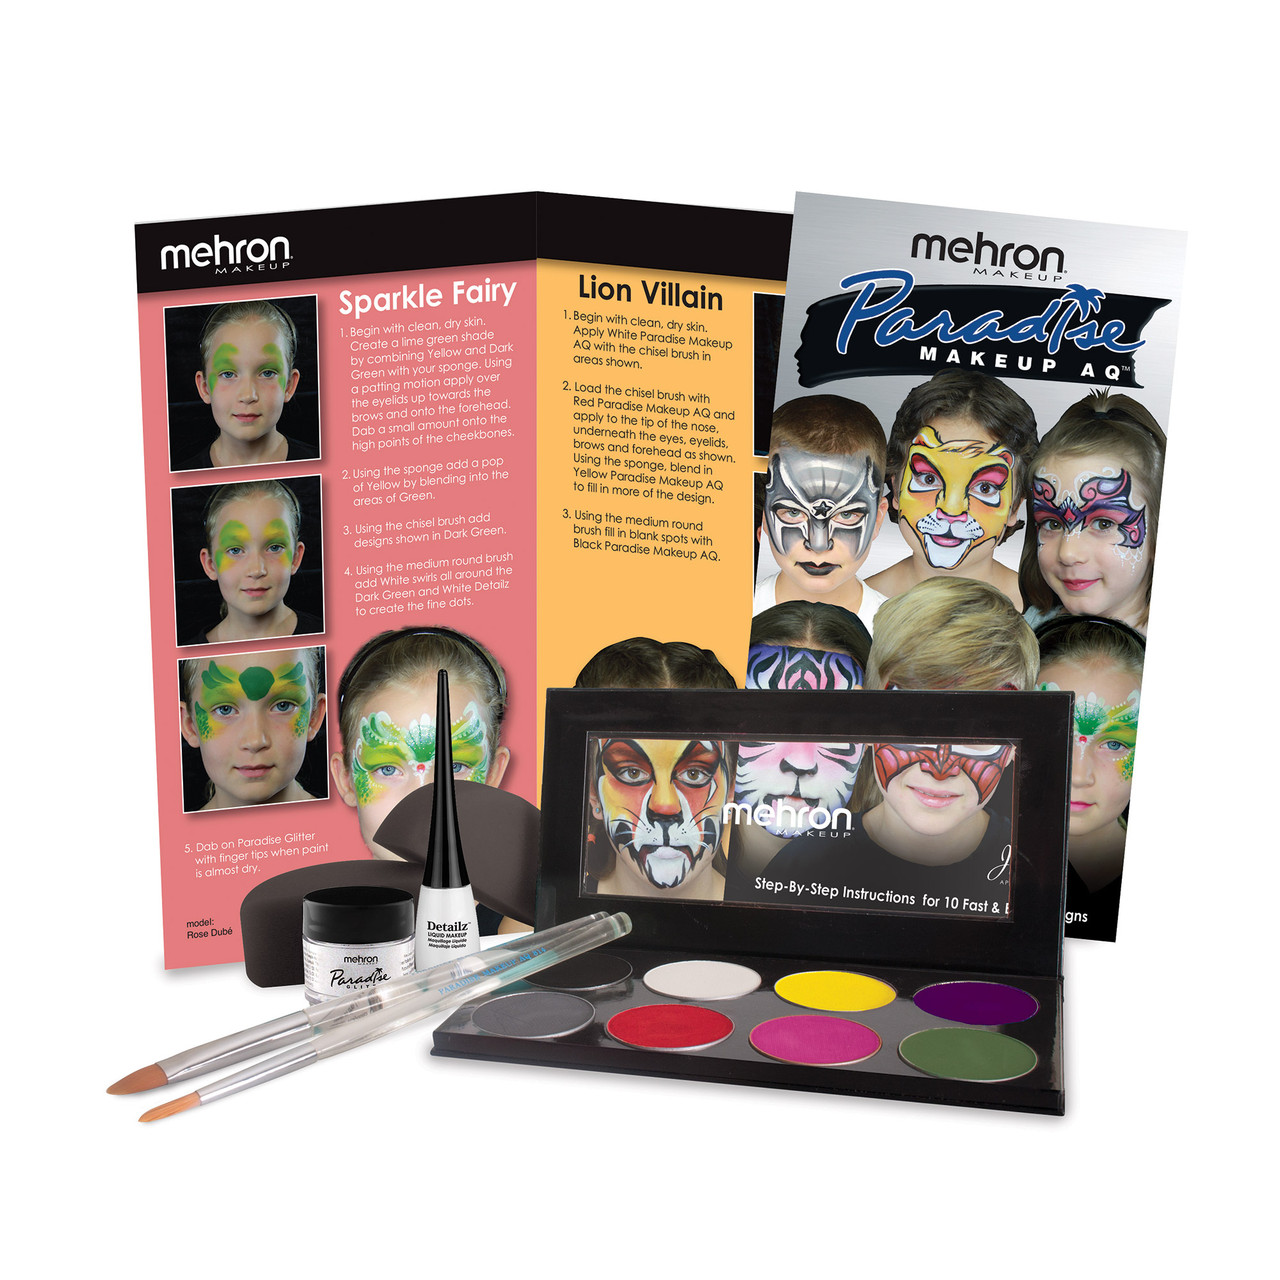  AOMIG Face Paint Kit, 20Pcs Make Up Set For Kids Adults, Non  Toxic Face And Body Painting Palette